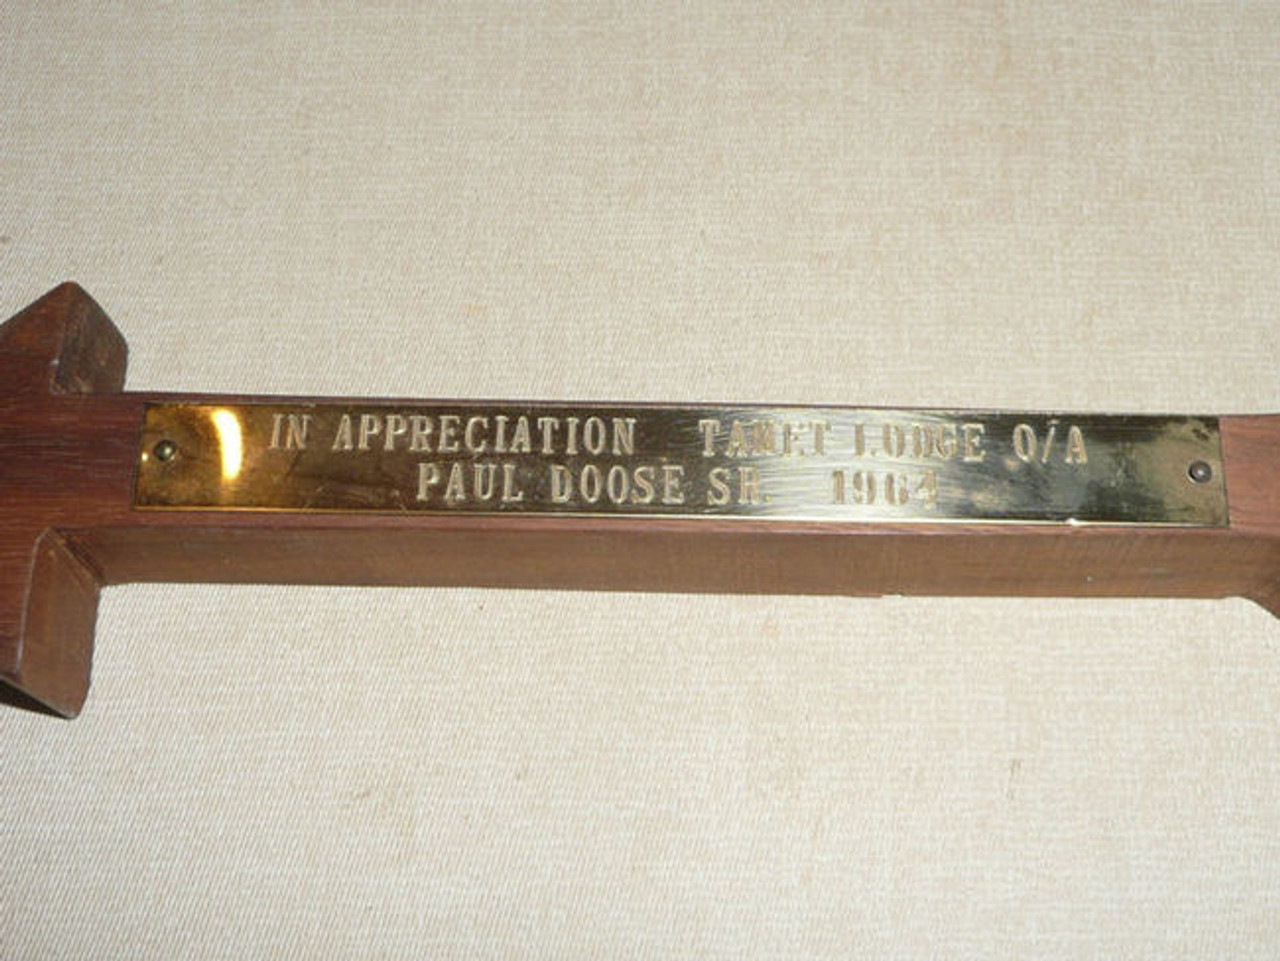 1964 Tamet Lodge #225, Crescent Bay Area Council, Wood Arrow with Engraving